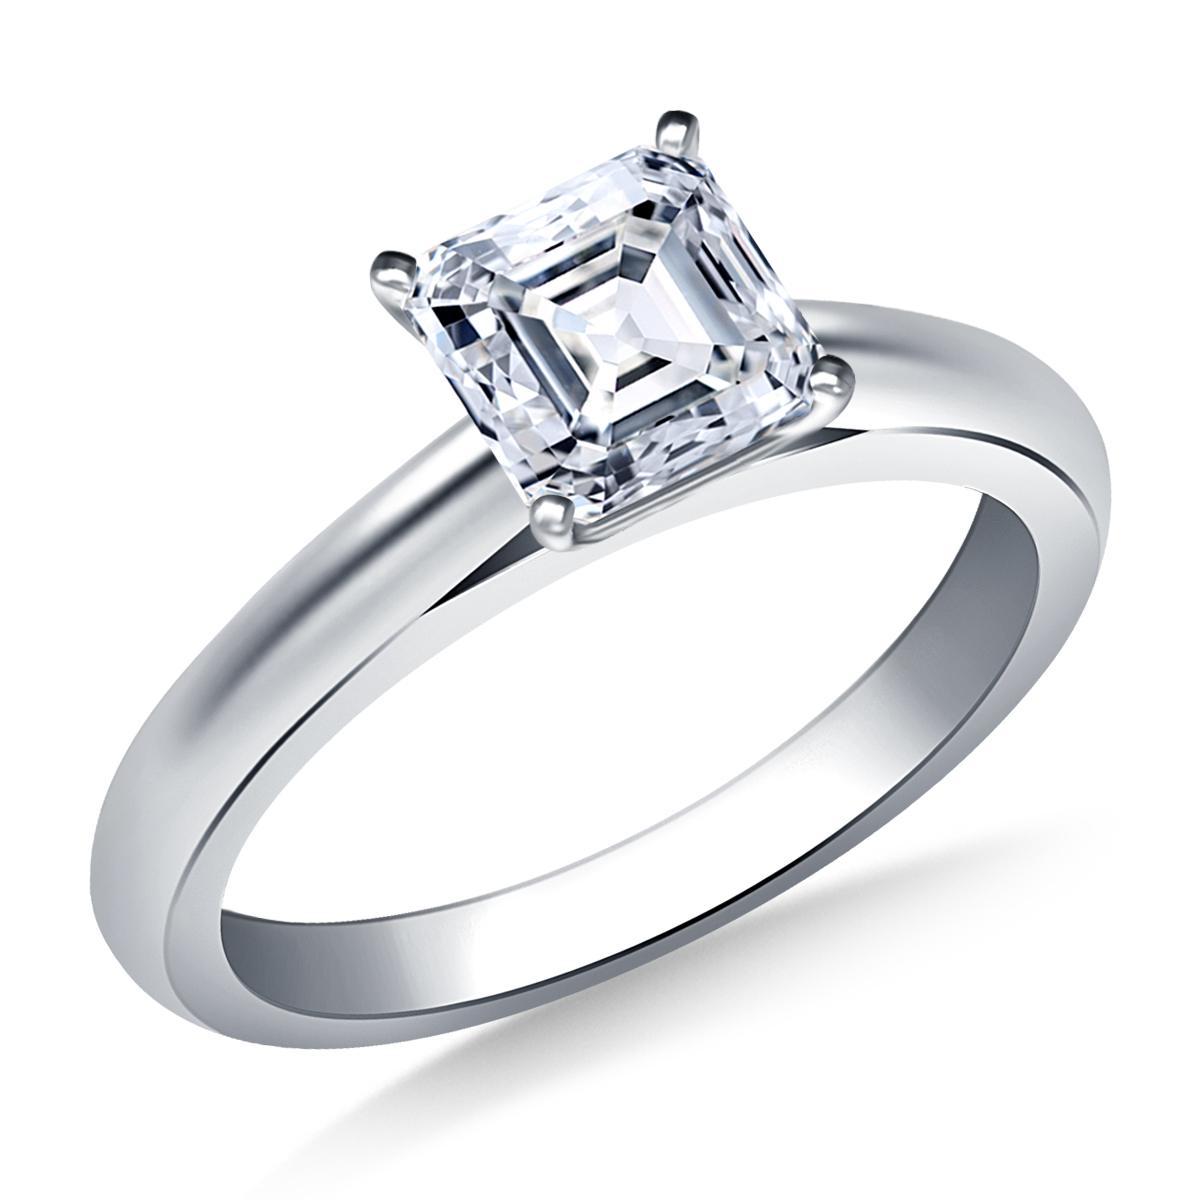 Solitaire Four Prong Comfort Fit Cathedral Engagement Ring in 14K White Gold (2.4 mm)